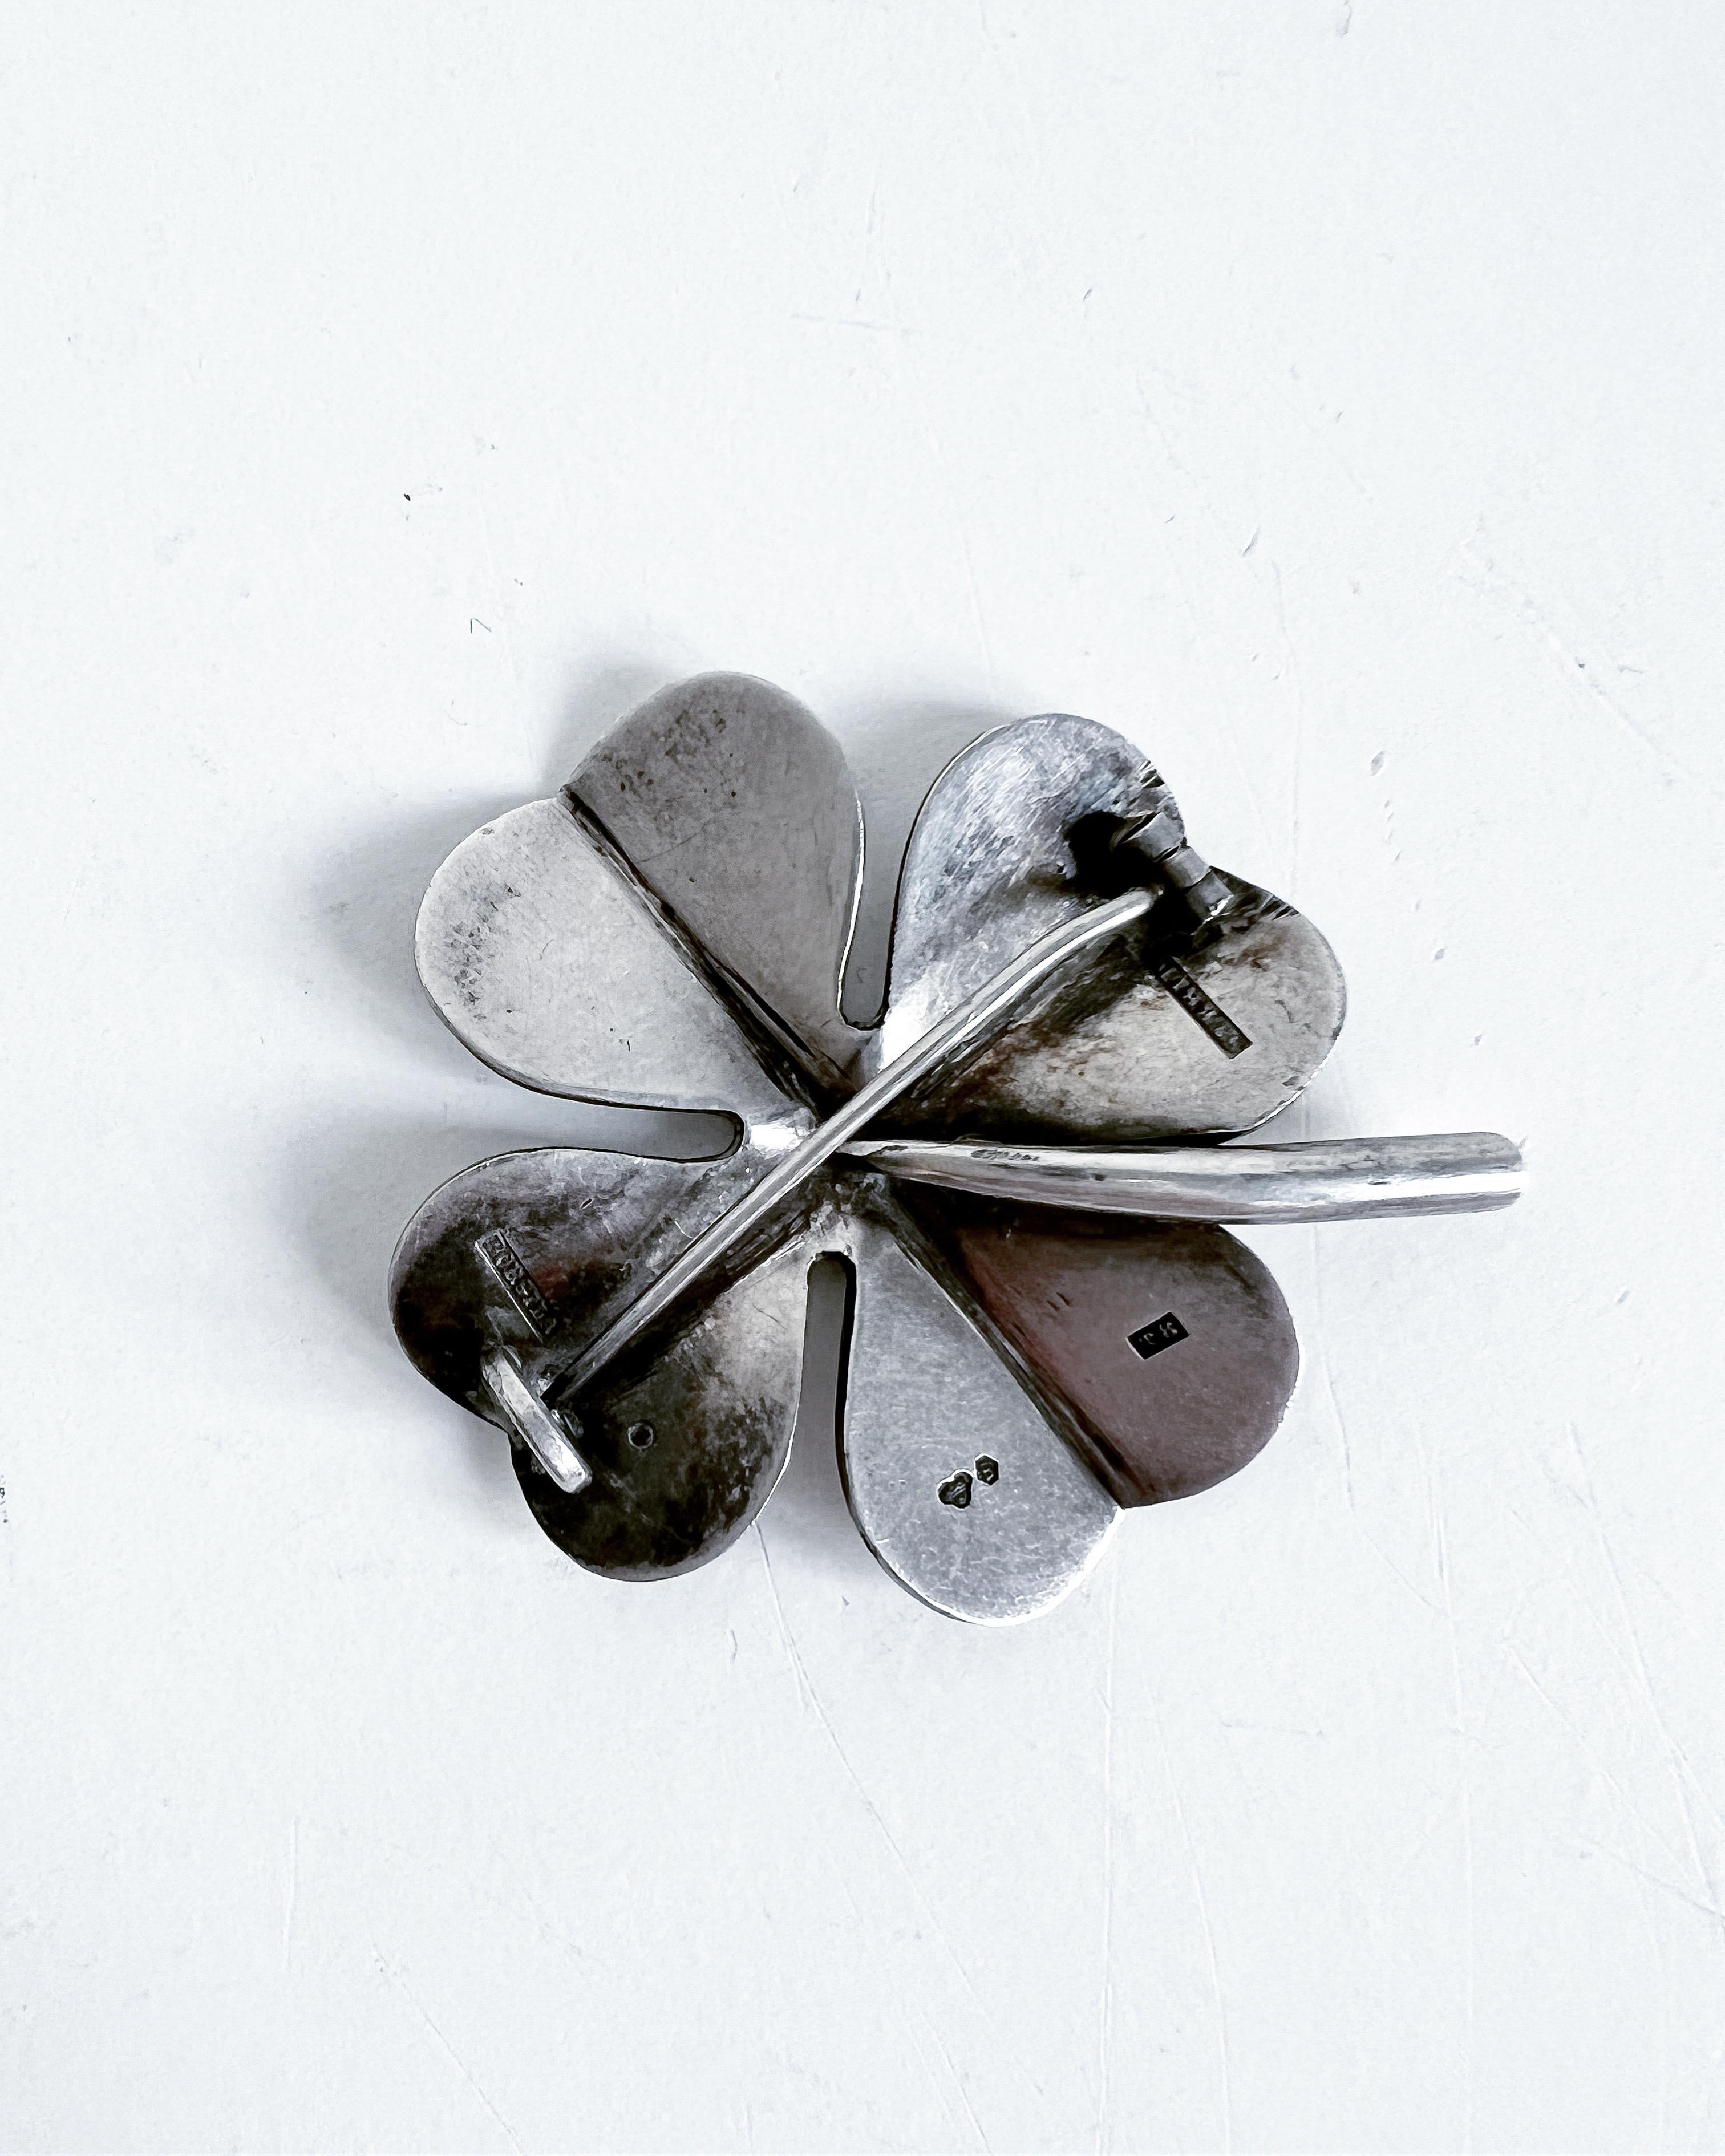 Beautiful modernist silver brooch from Atelier Borgila -1945.
Signed with maker's mark.